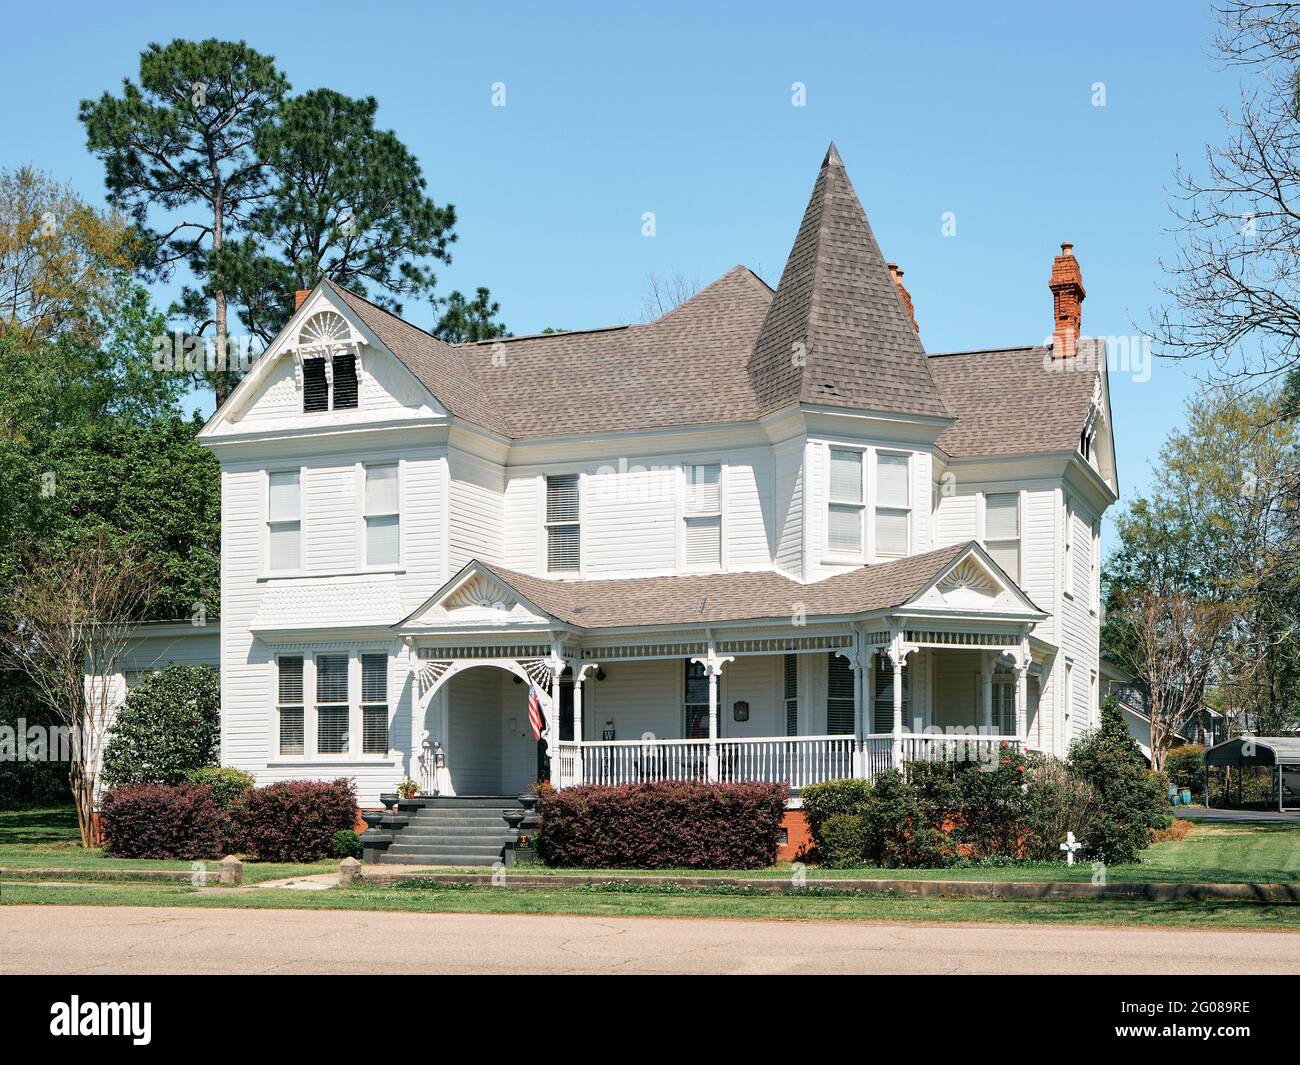 Beautiful Gothic Revival architecture is used for this single family home or house in Wetumpka Alabama, USA. Stock Photo